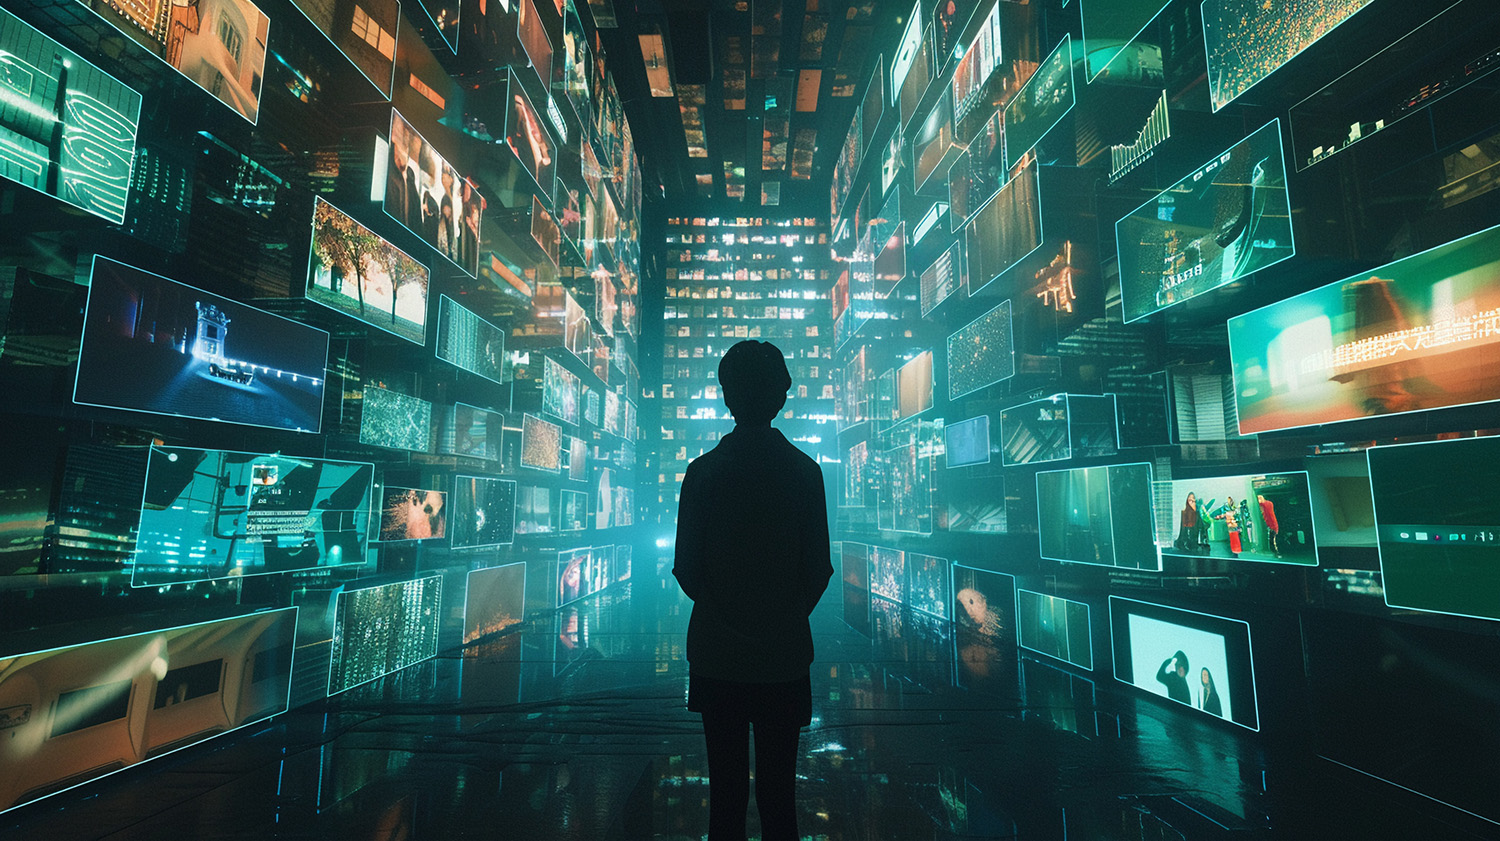 A person stands in a room surrounded by numerous screens displaying various images and data, evoking a sense of futuristic and high-tech visual storytelling.